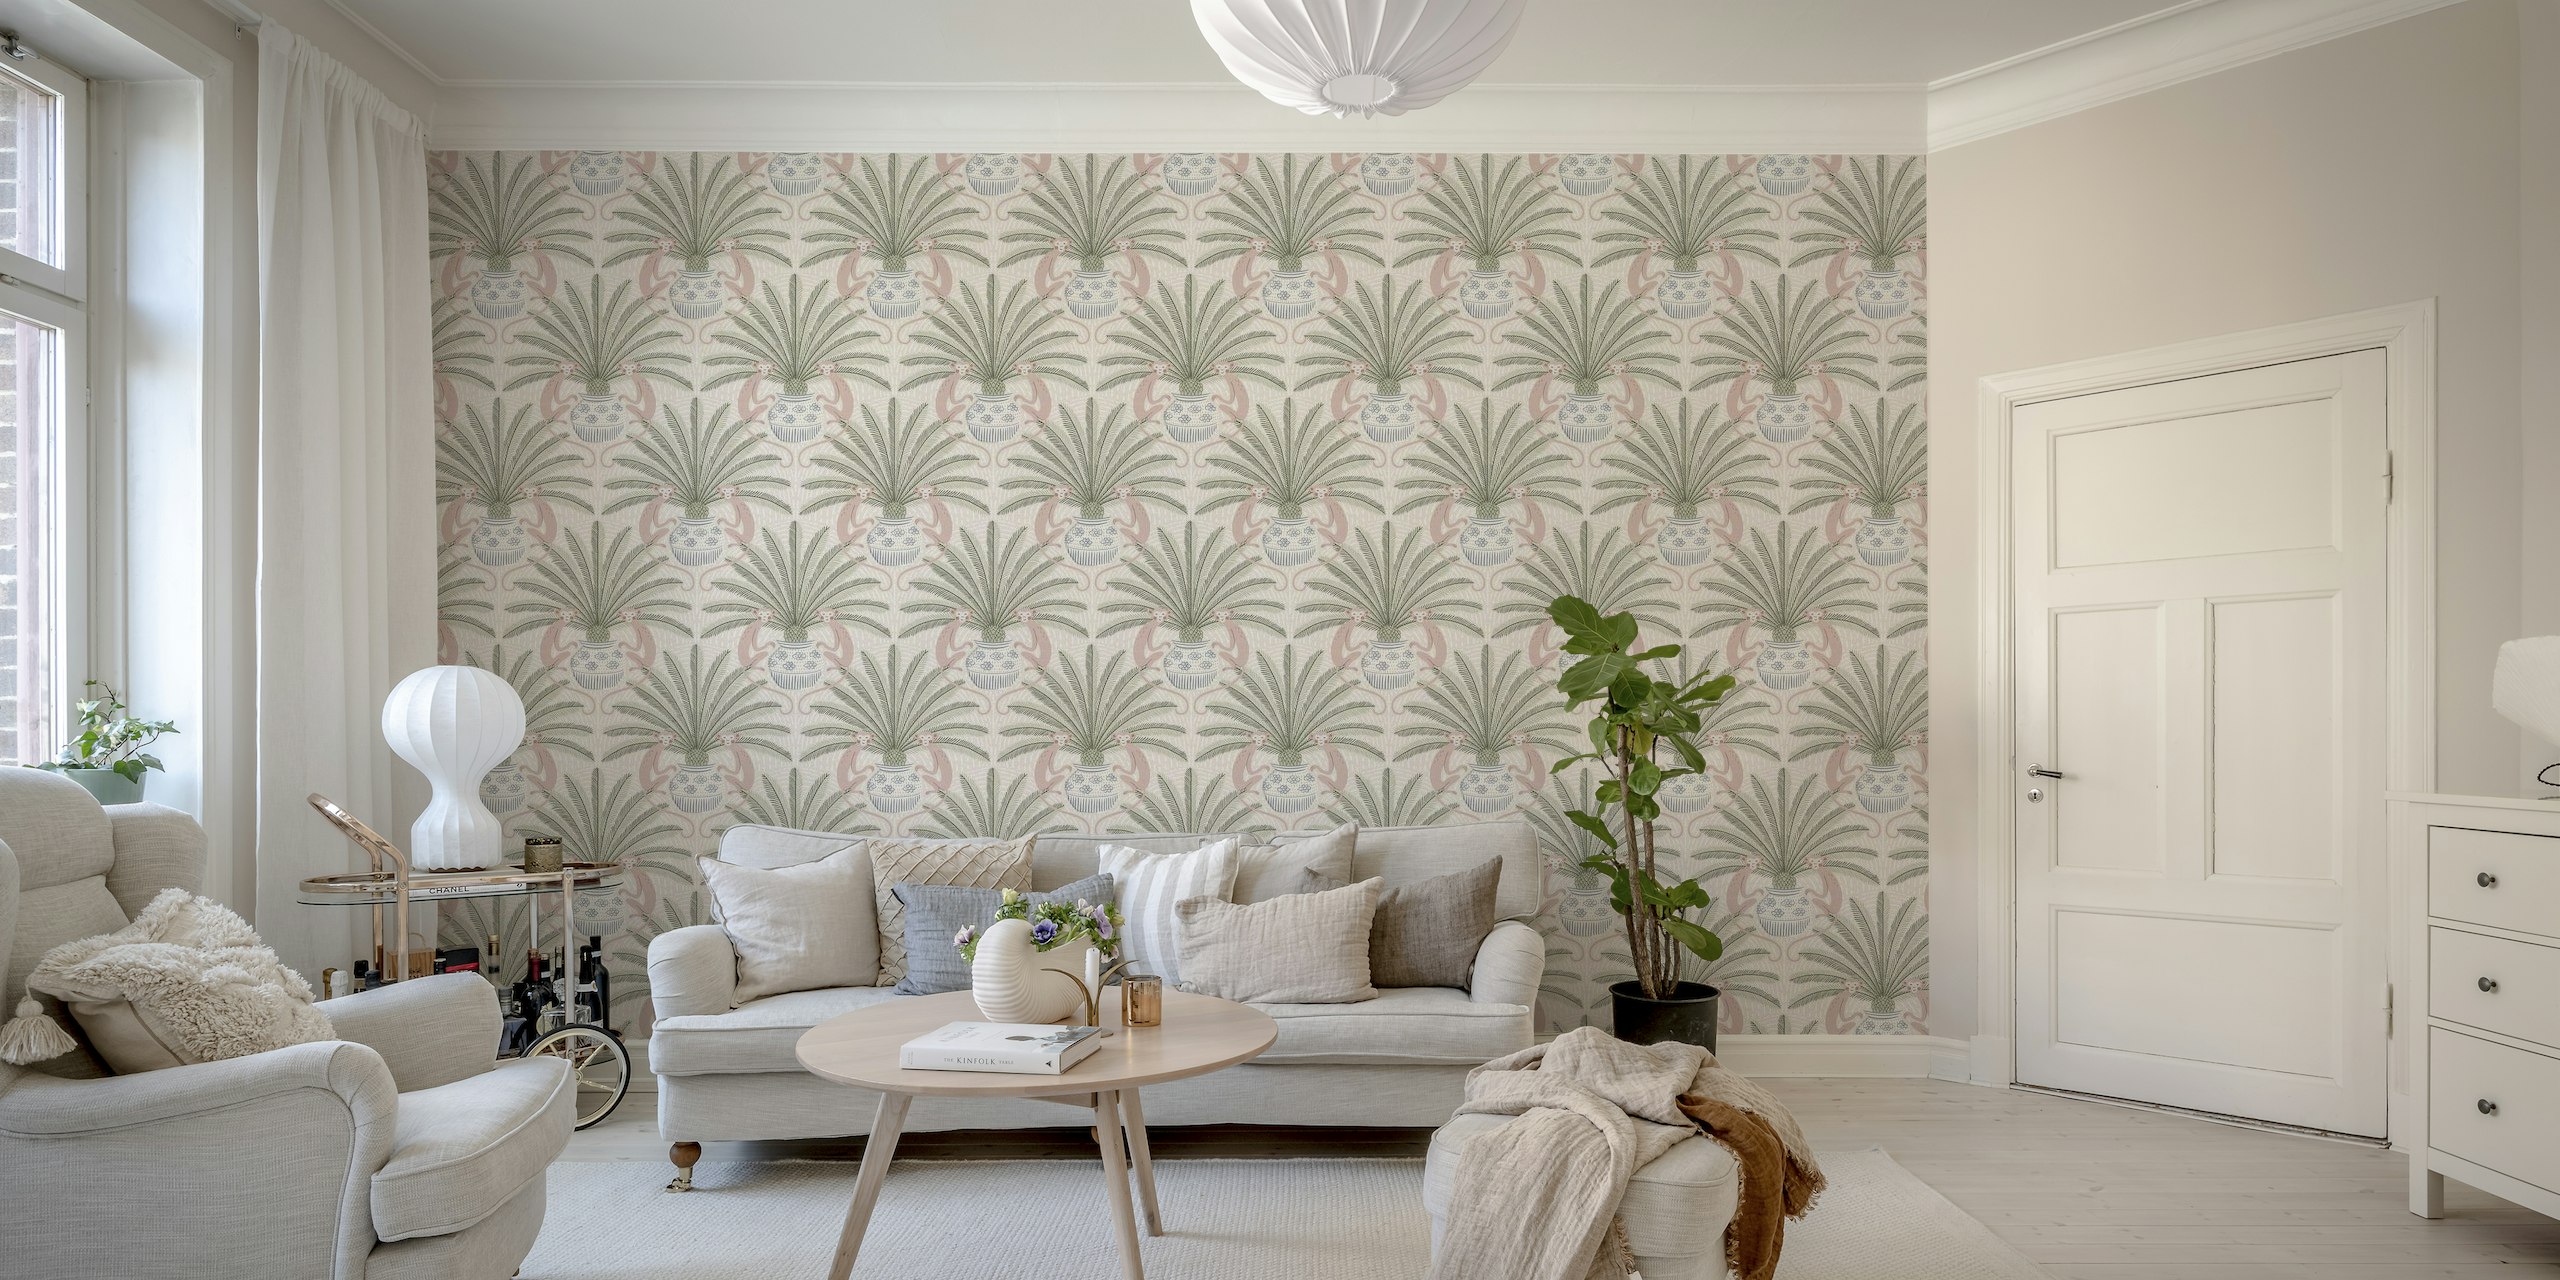 Sago Palm and Monkey wall mural on a dusty pink background with blue pottery accents